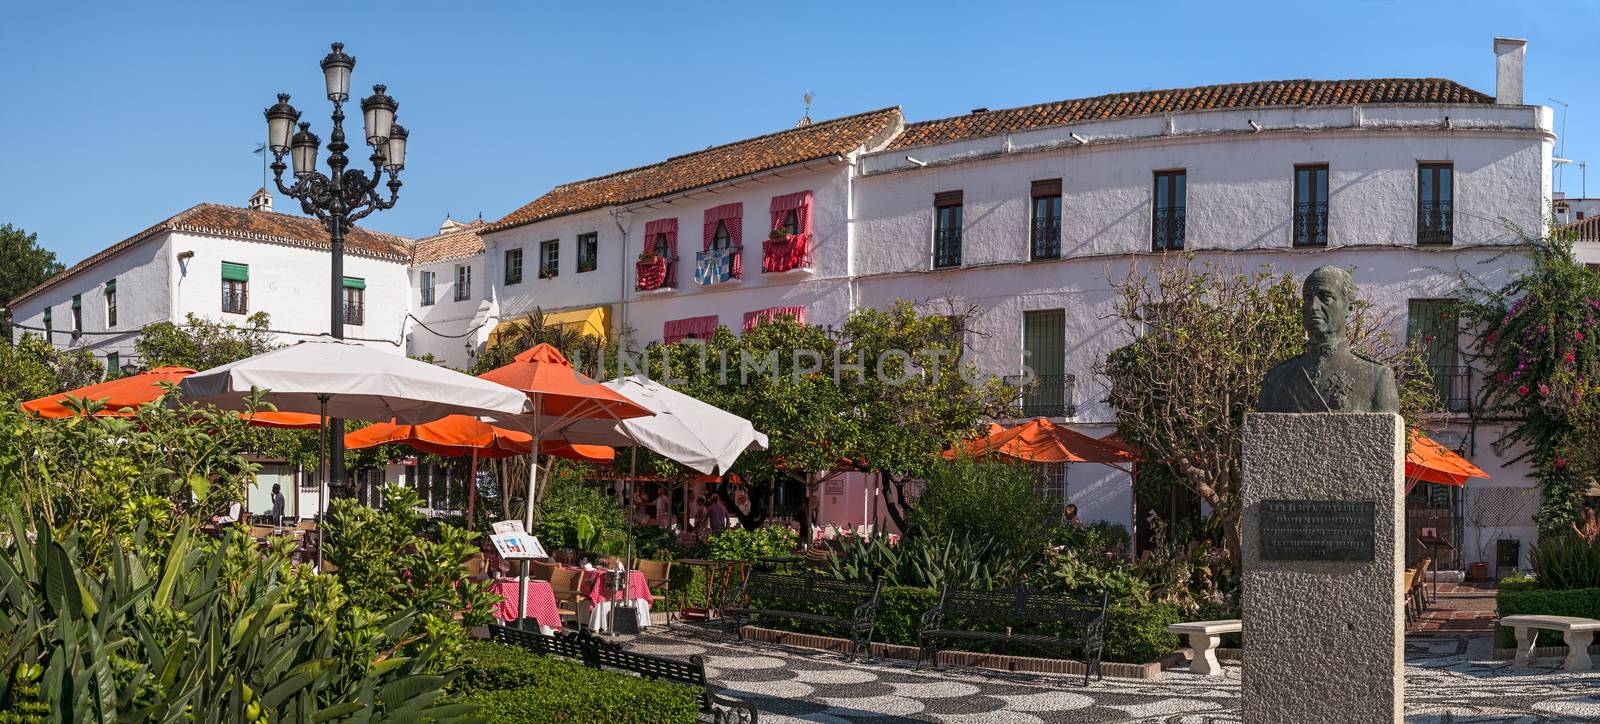 Marbella, Spain - August 26th, 2018. Orange Square, The Plaza de los Naranjos in the old town of Marbella, Spain. The plaza dates from 1485.